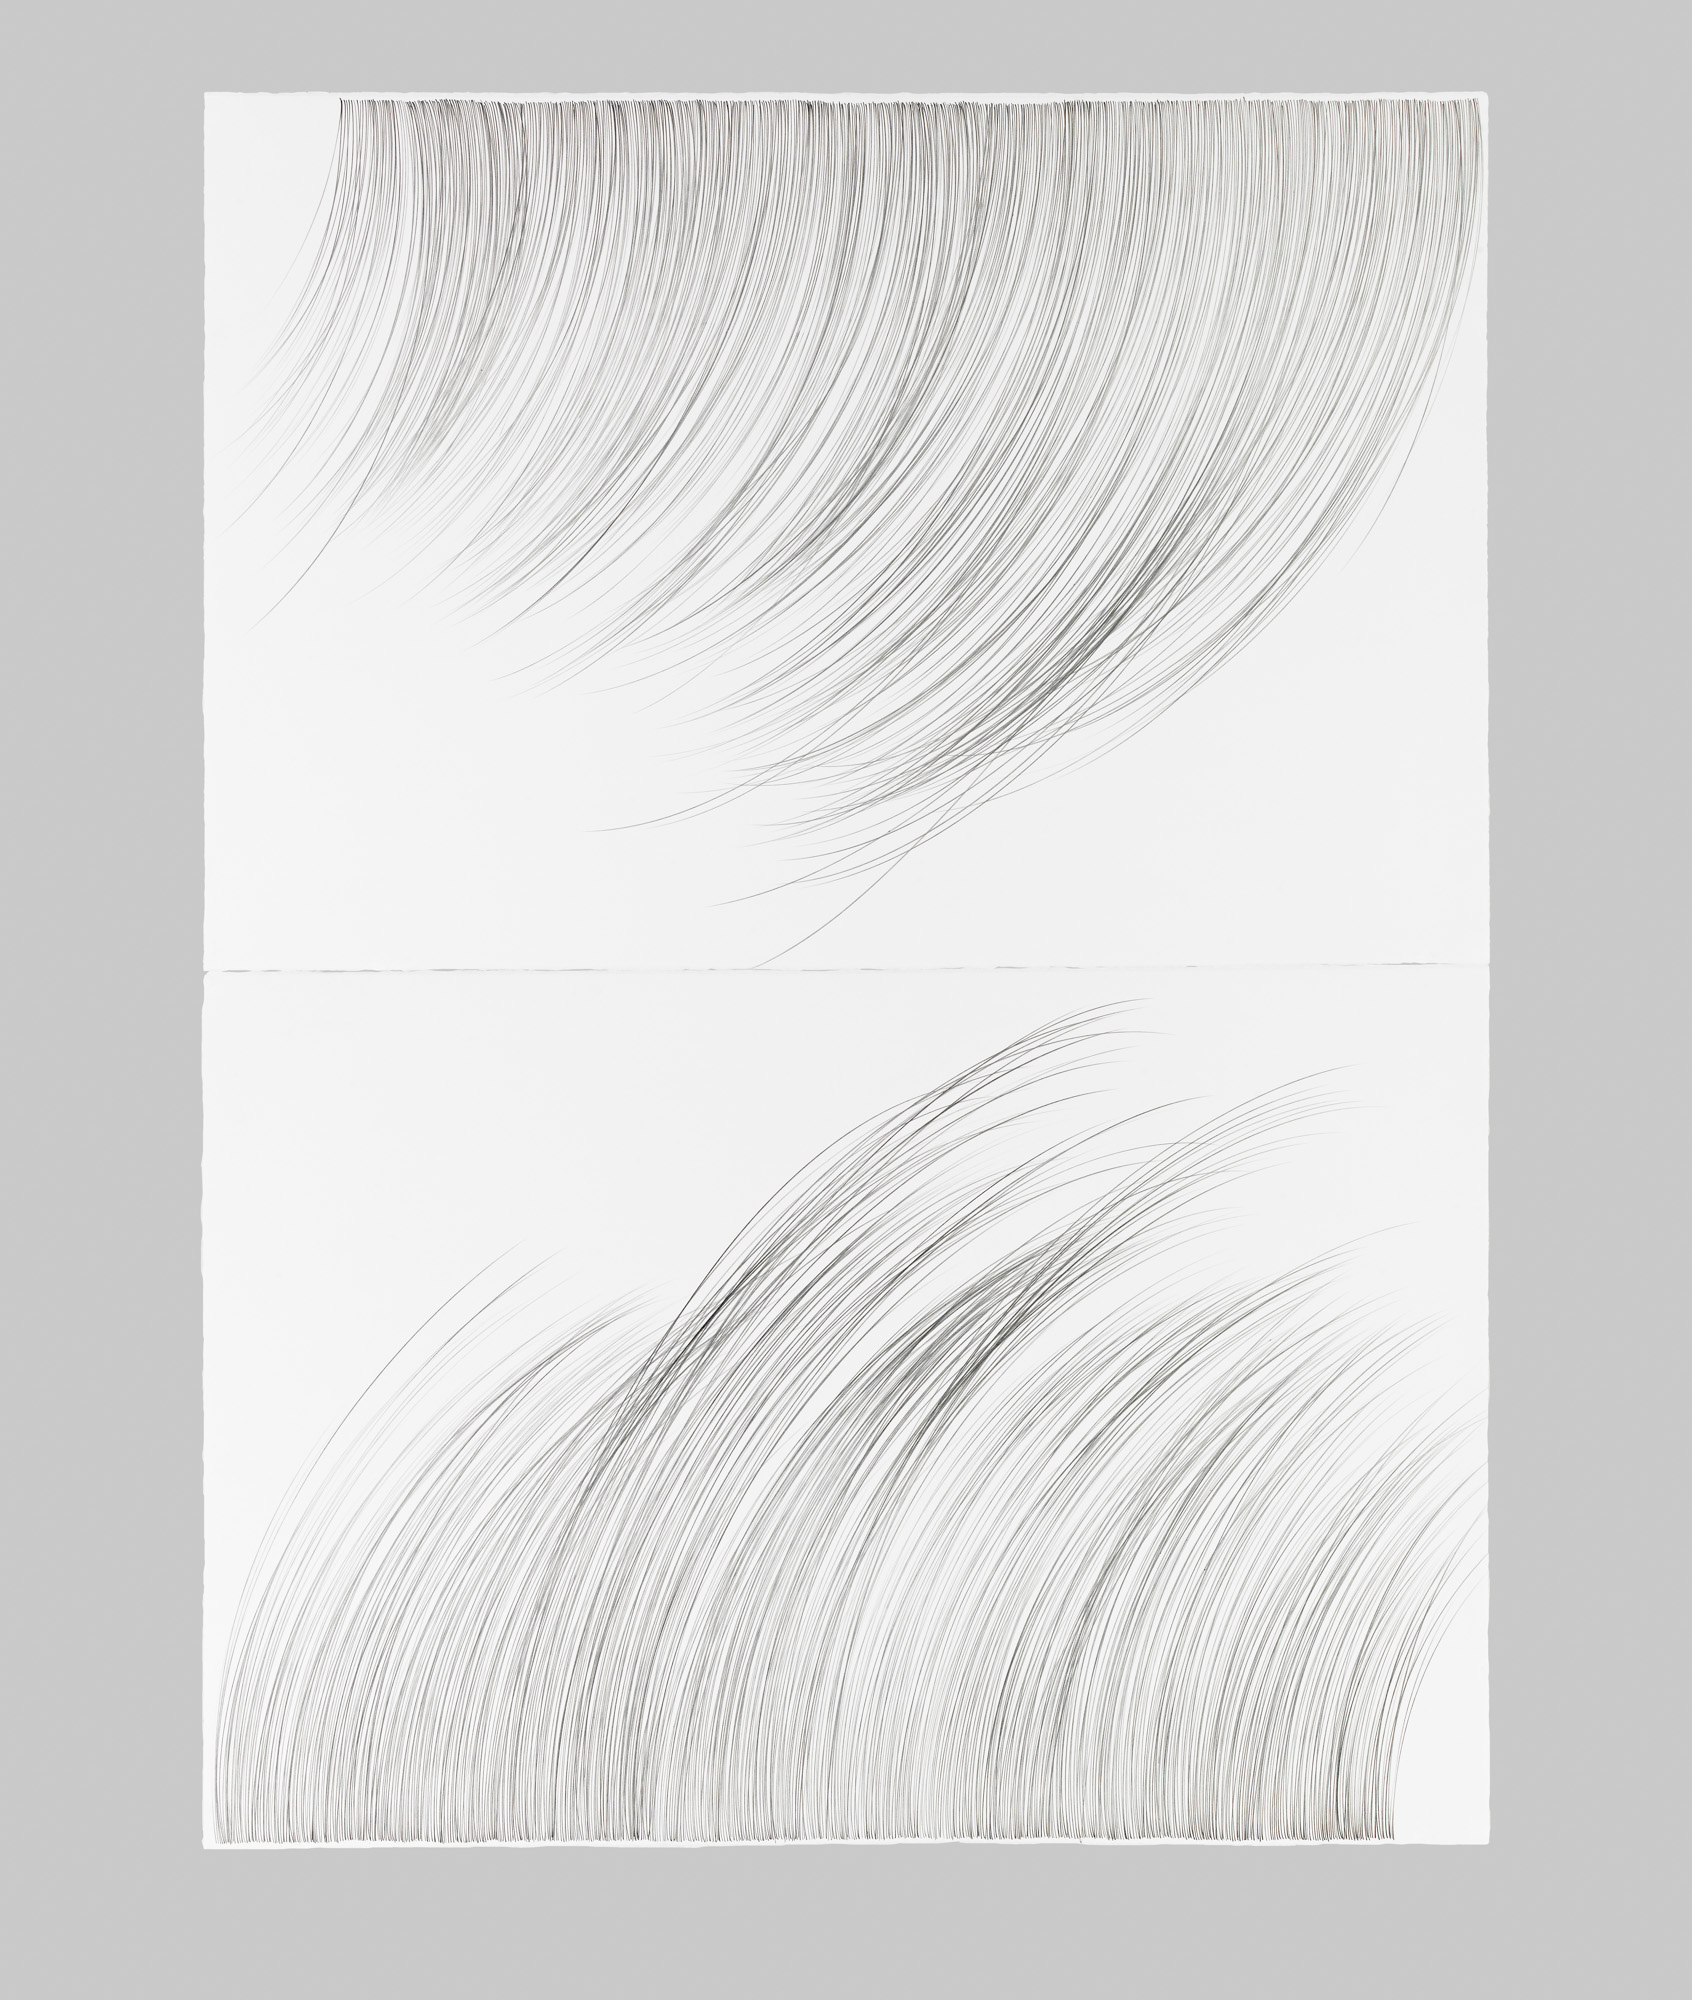 Large RainGrass, II   Graphite on cotton paper, 60 x 44 inches, diptych, 2015